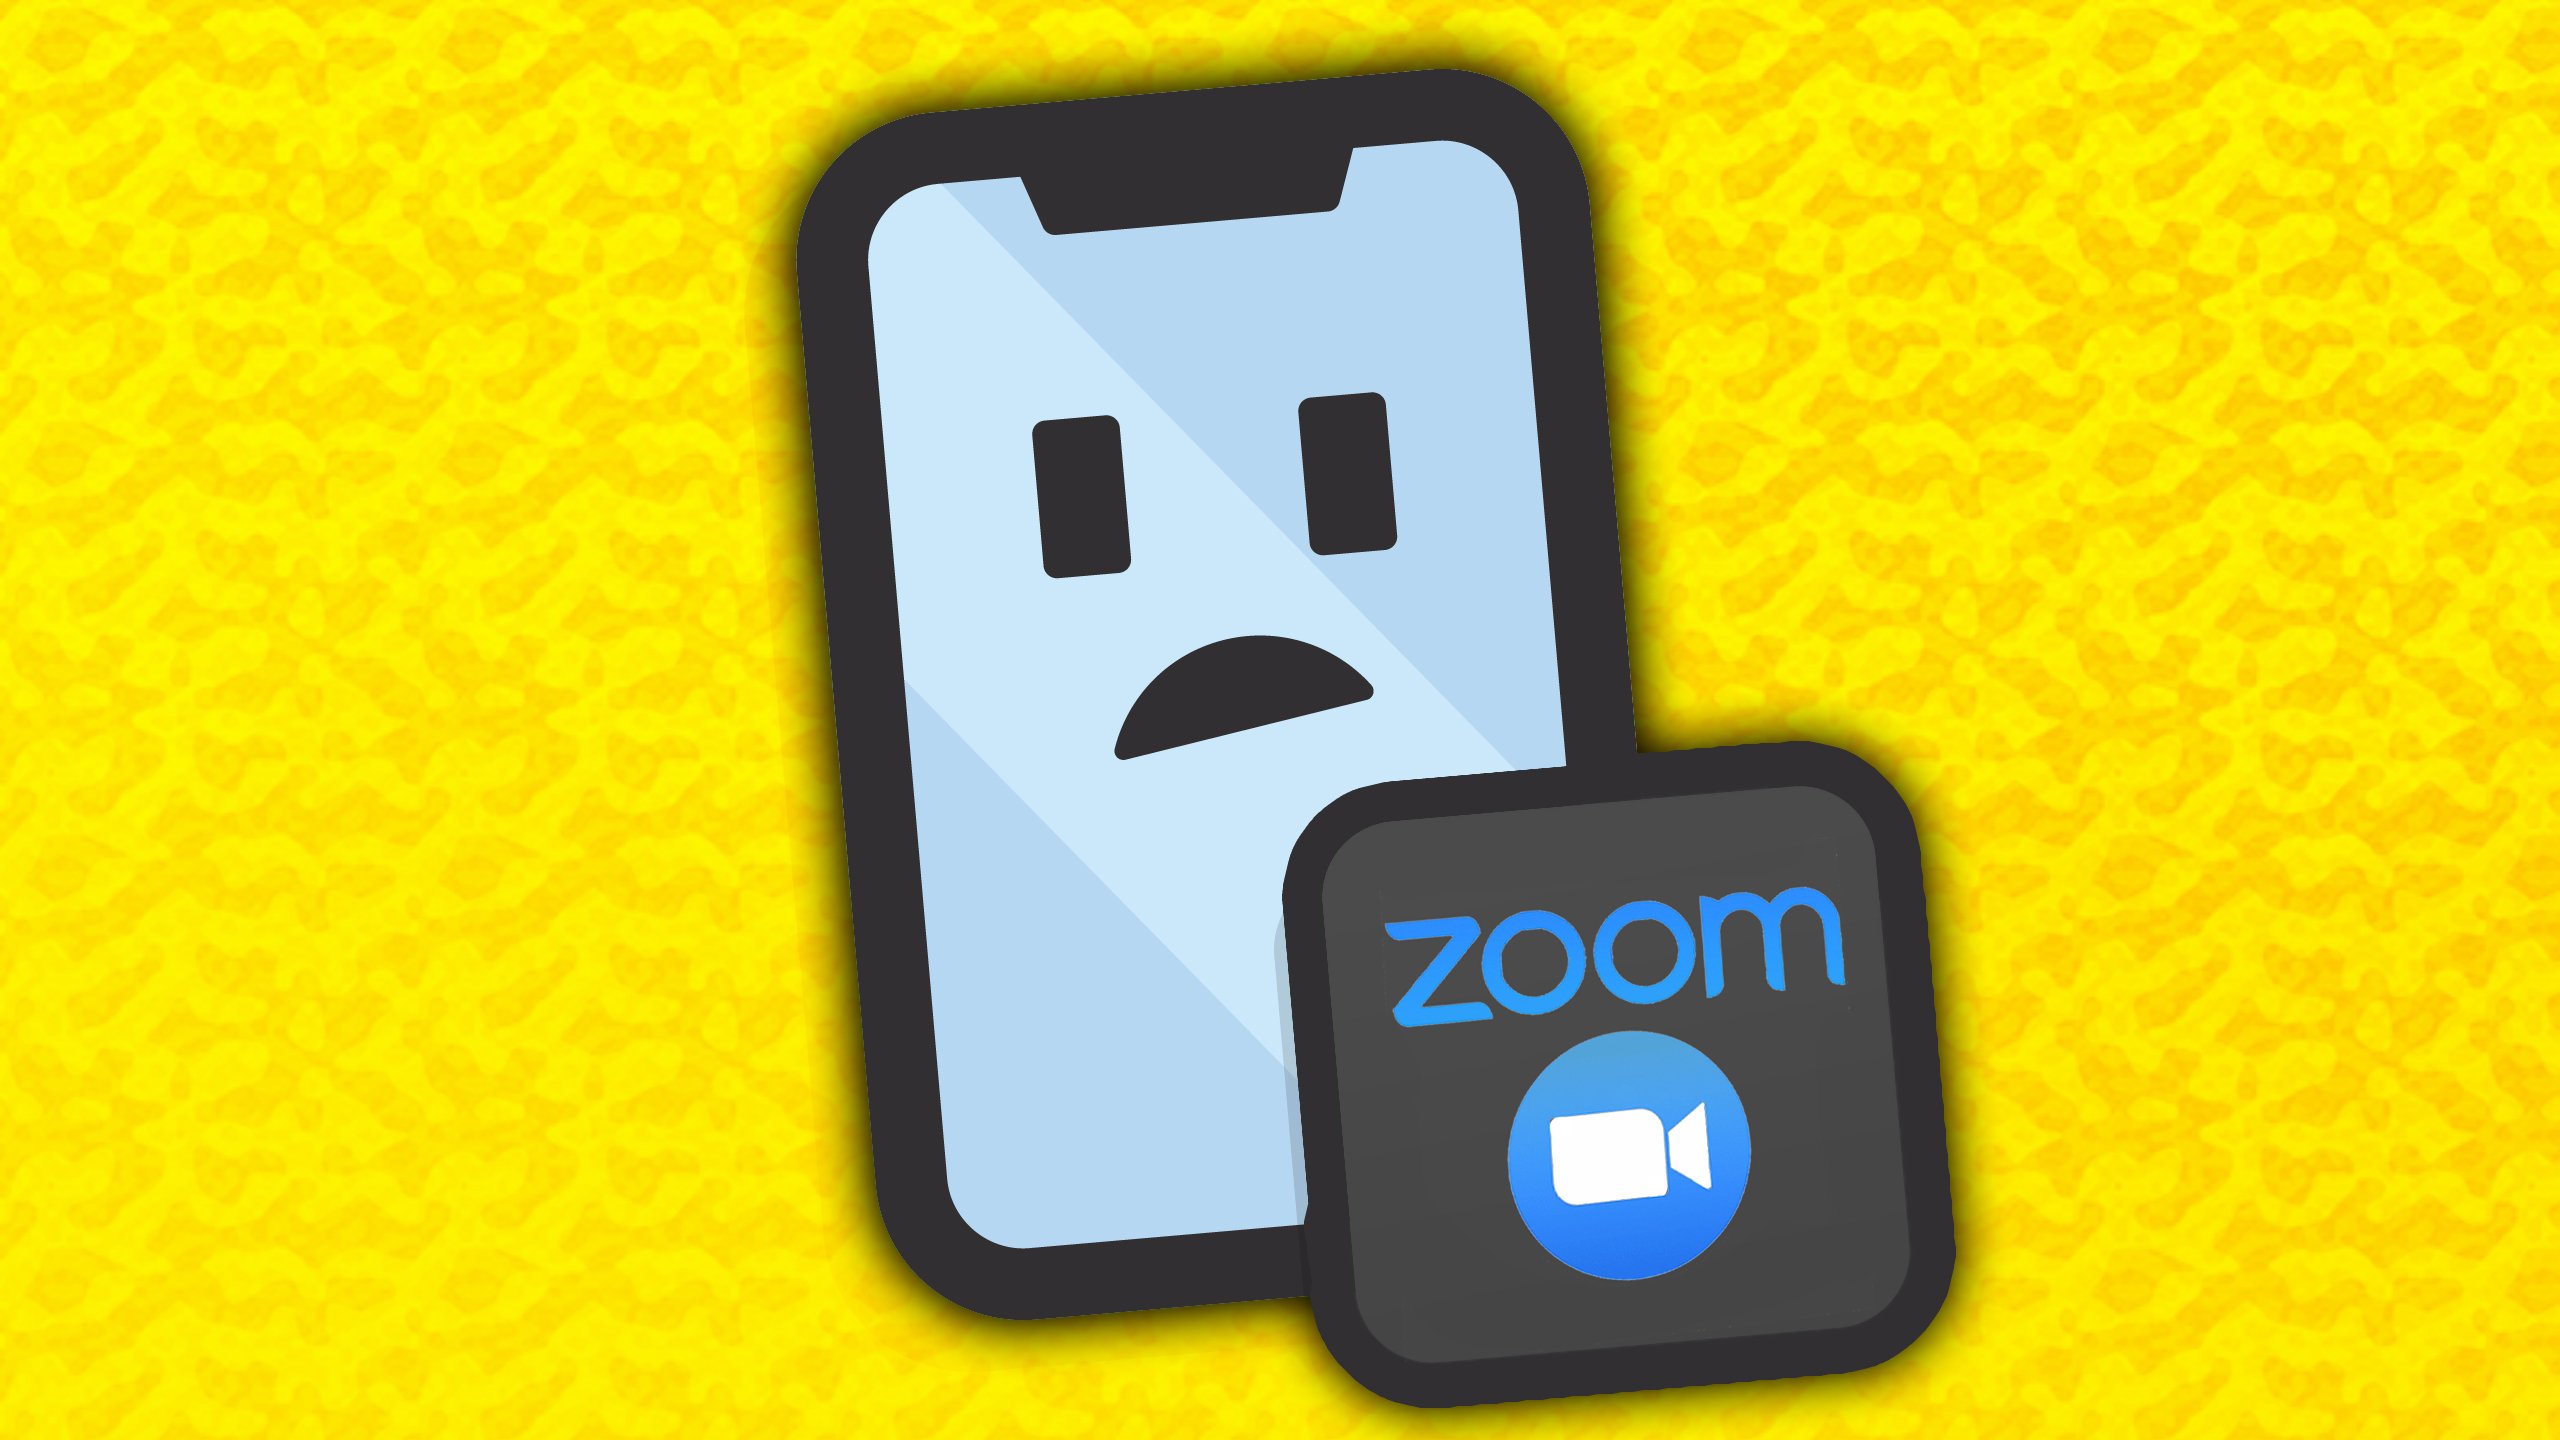 Zoom App Not Working On iPhone? Here's The Fix (For iPads Too)!